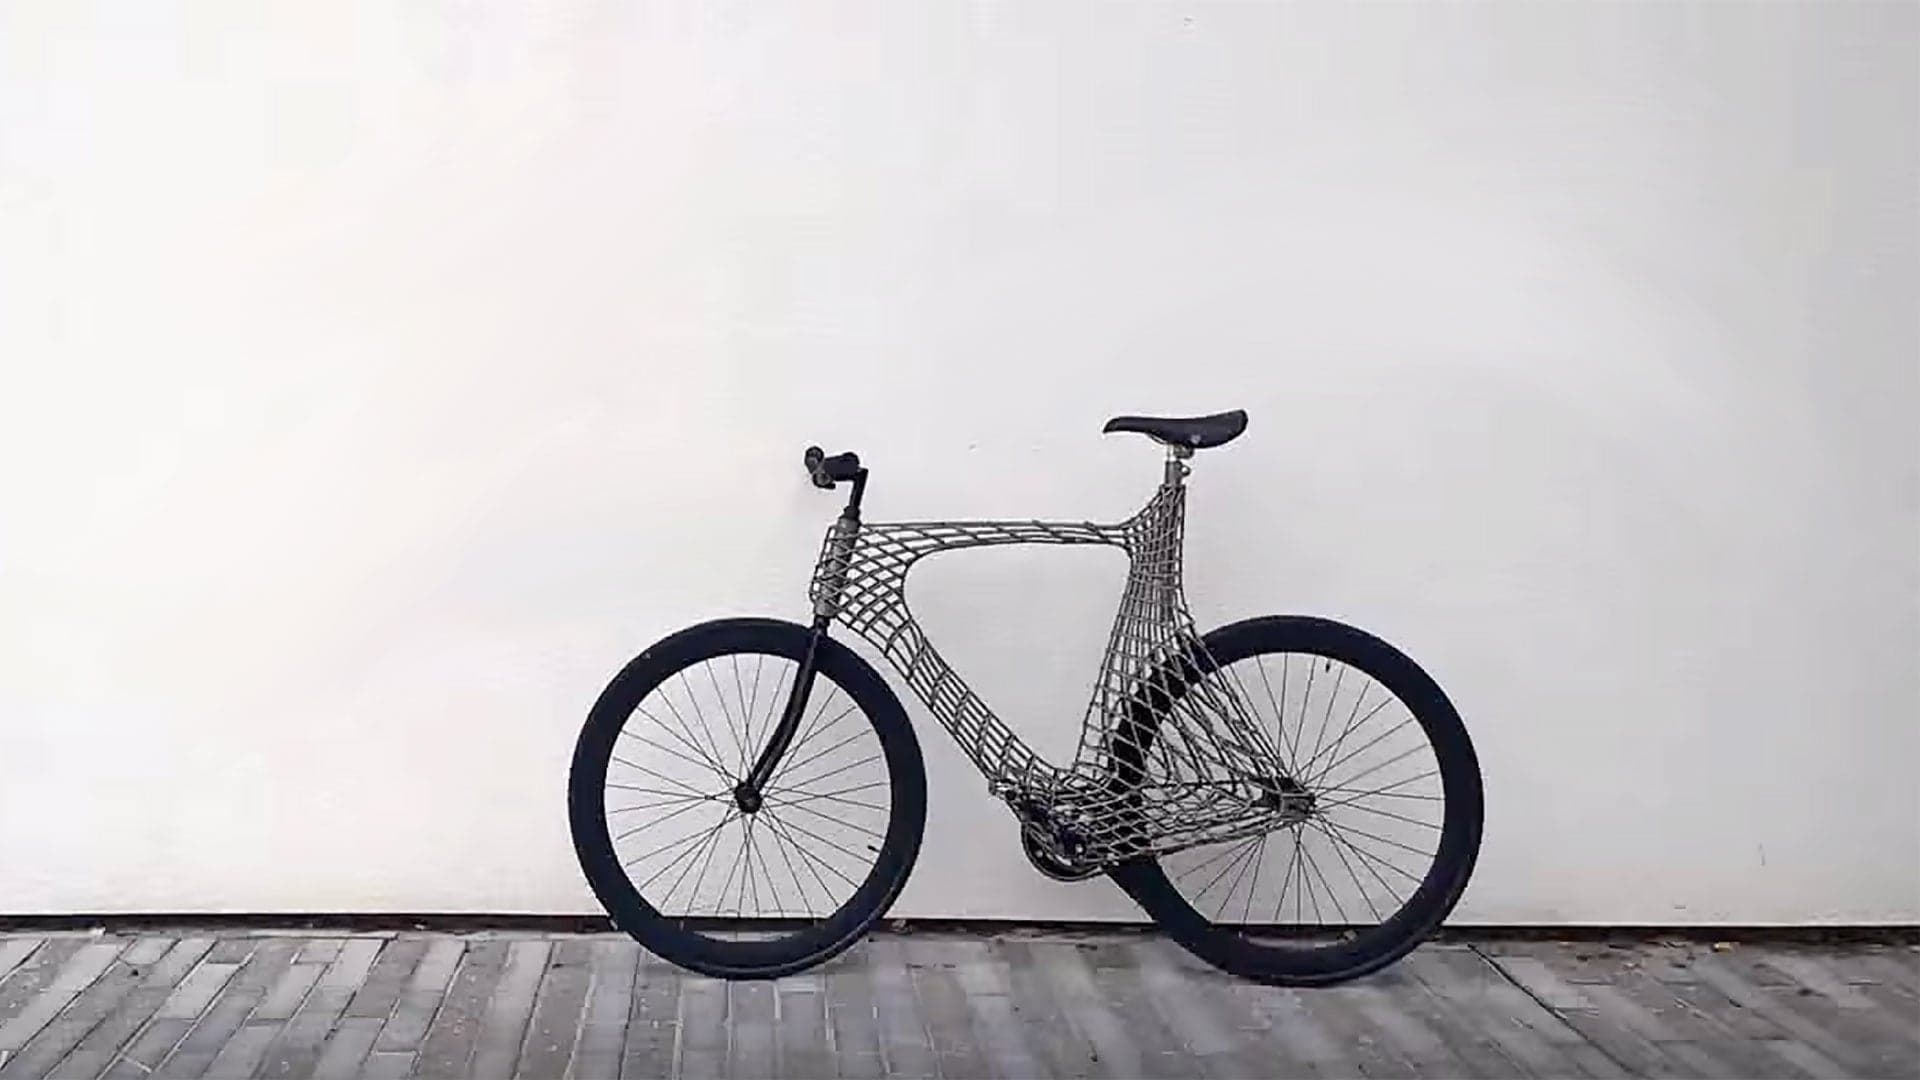 Wild 3D Printed Arc Bicycle Forecasts the Future